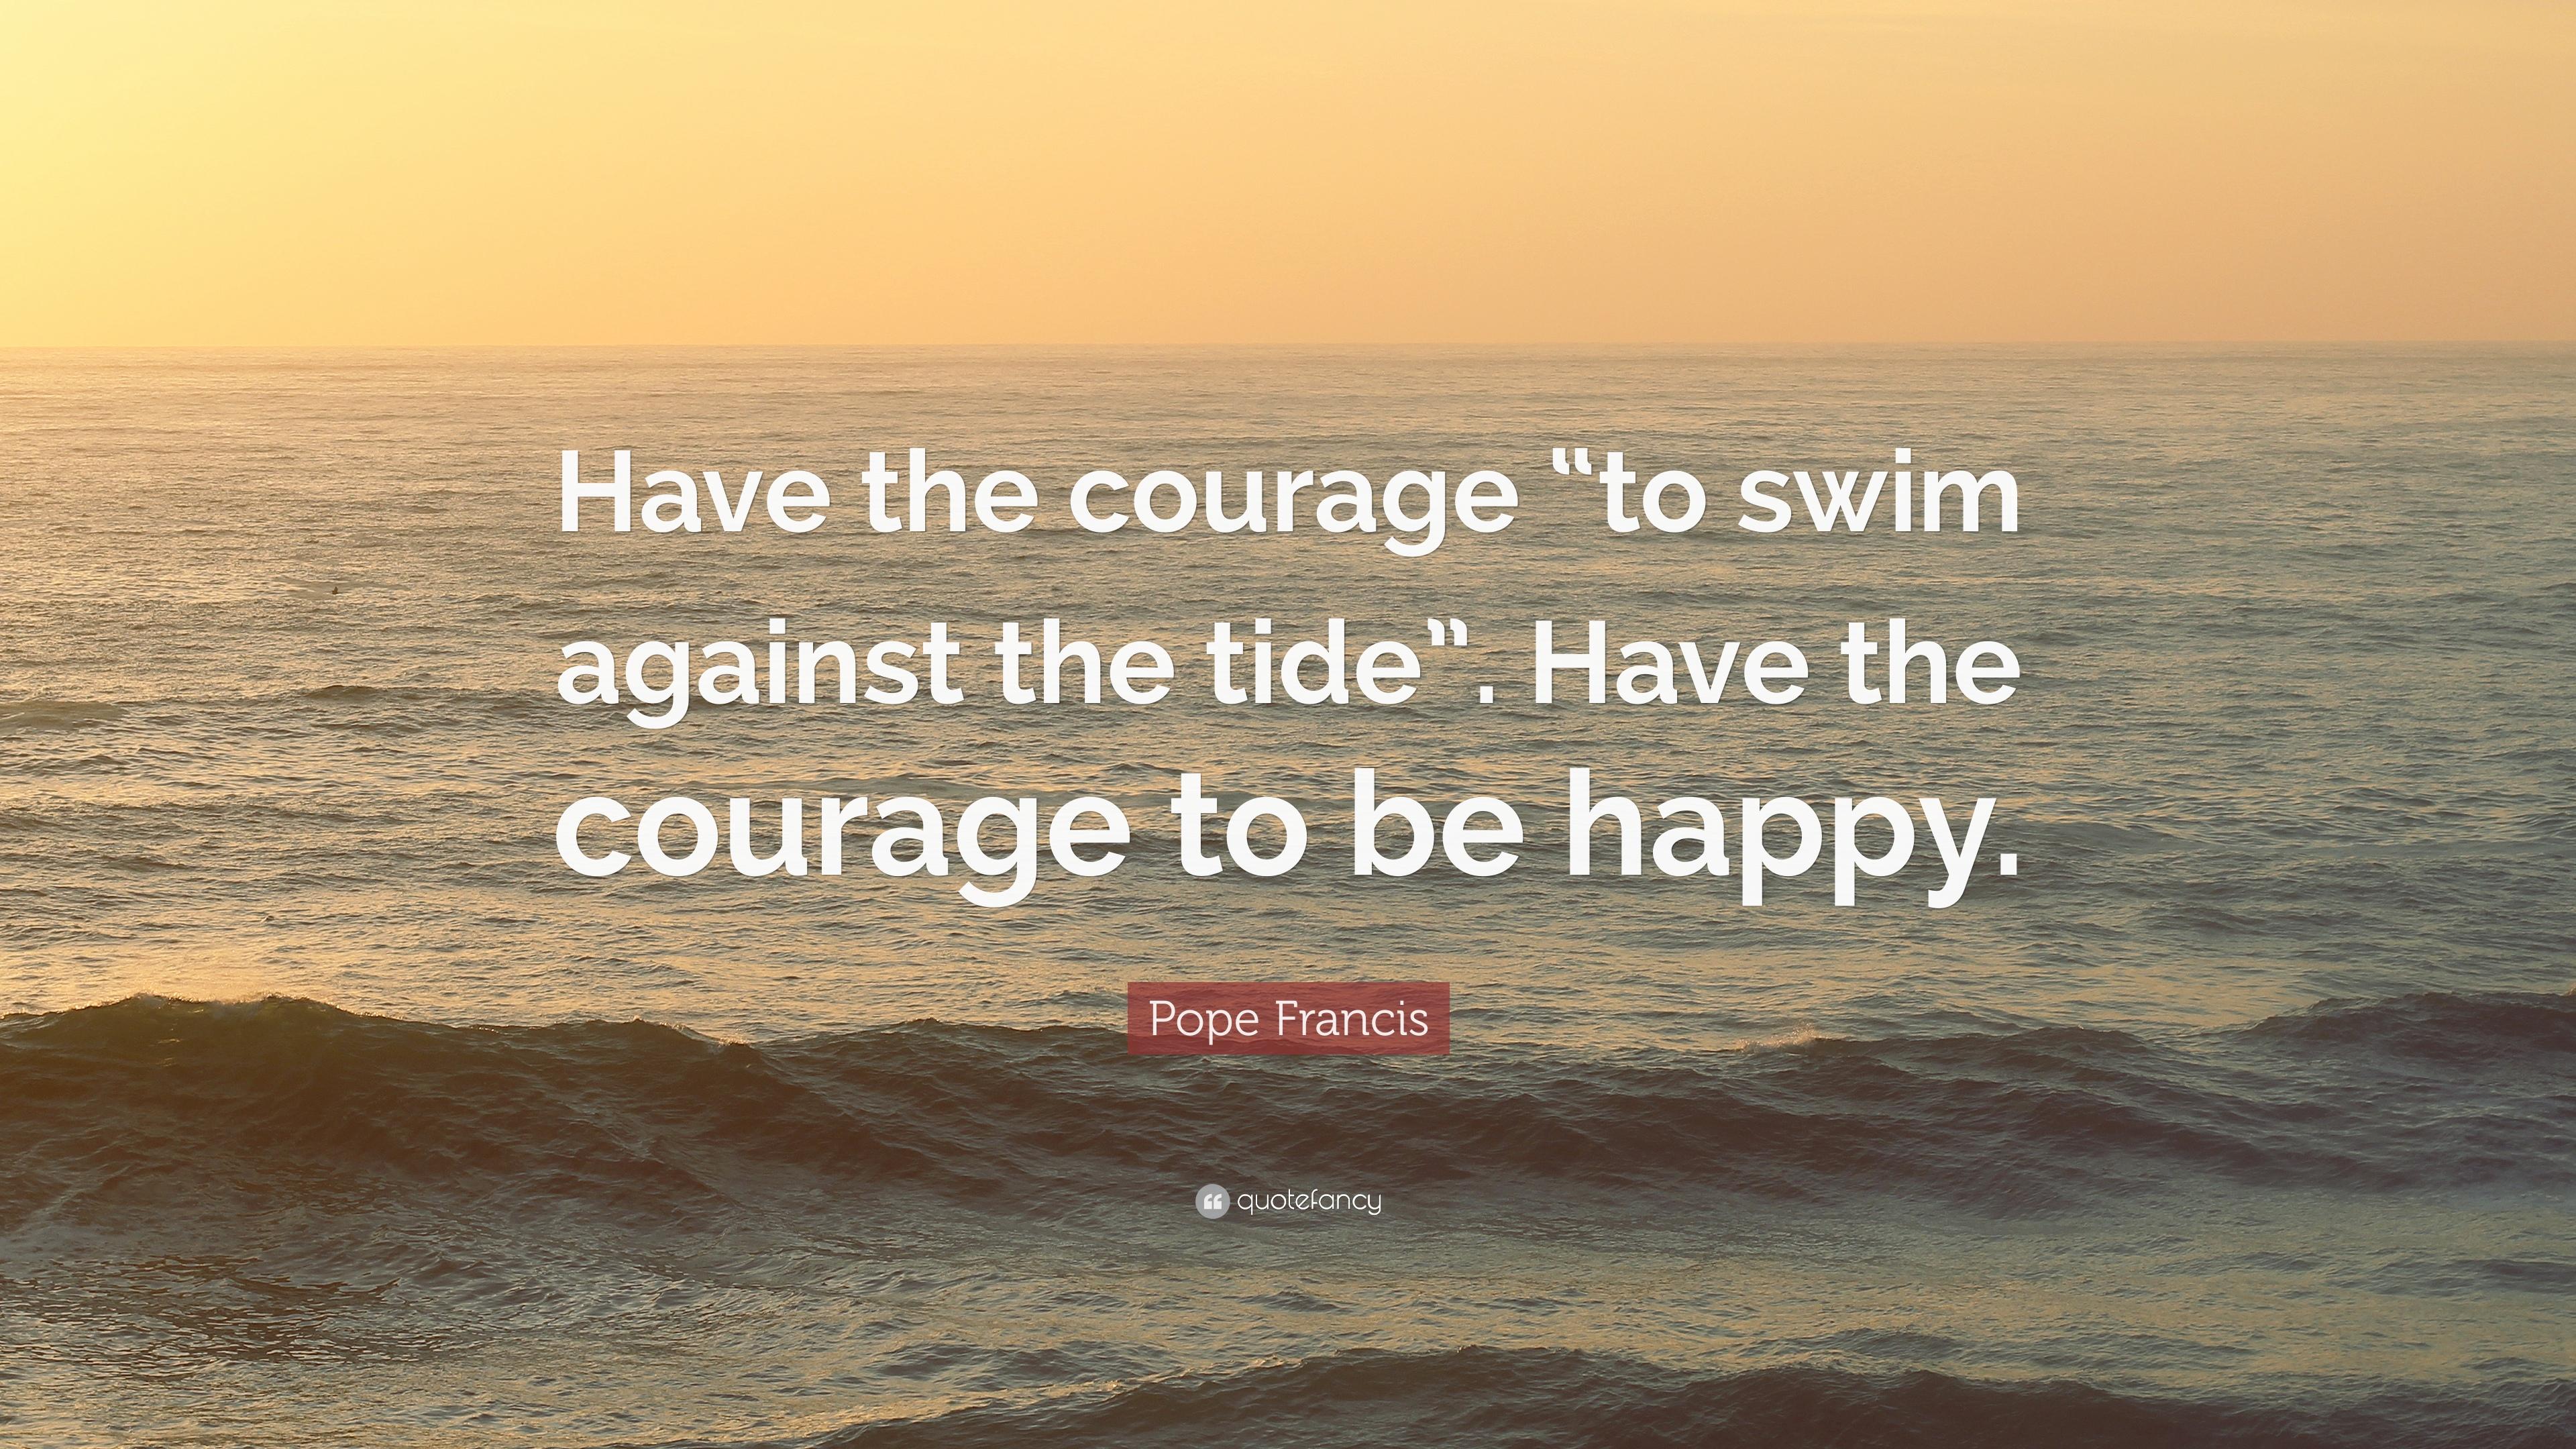 Pope Francis Quote: “Have the courage “to swim against